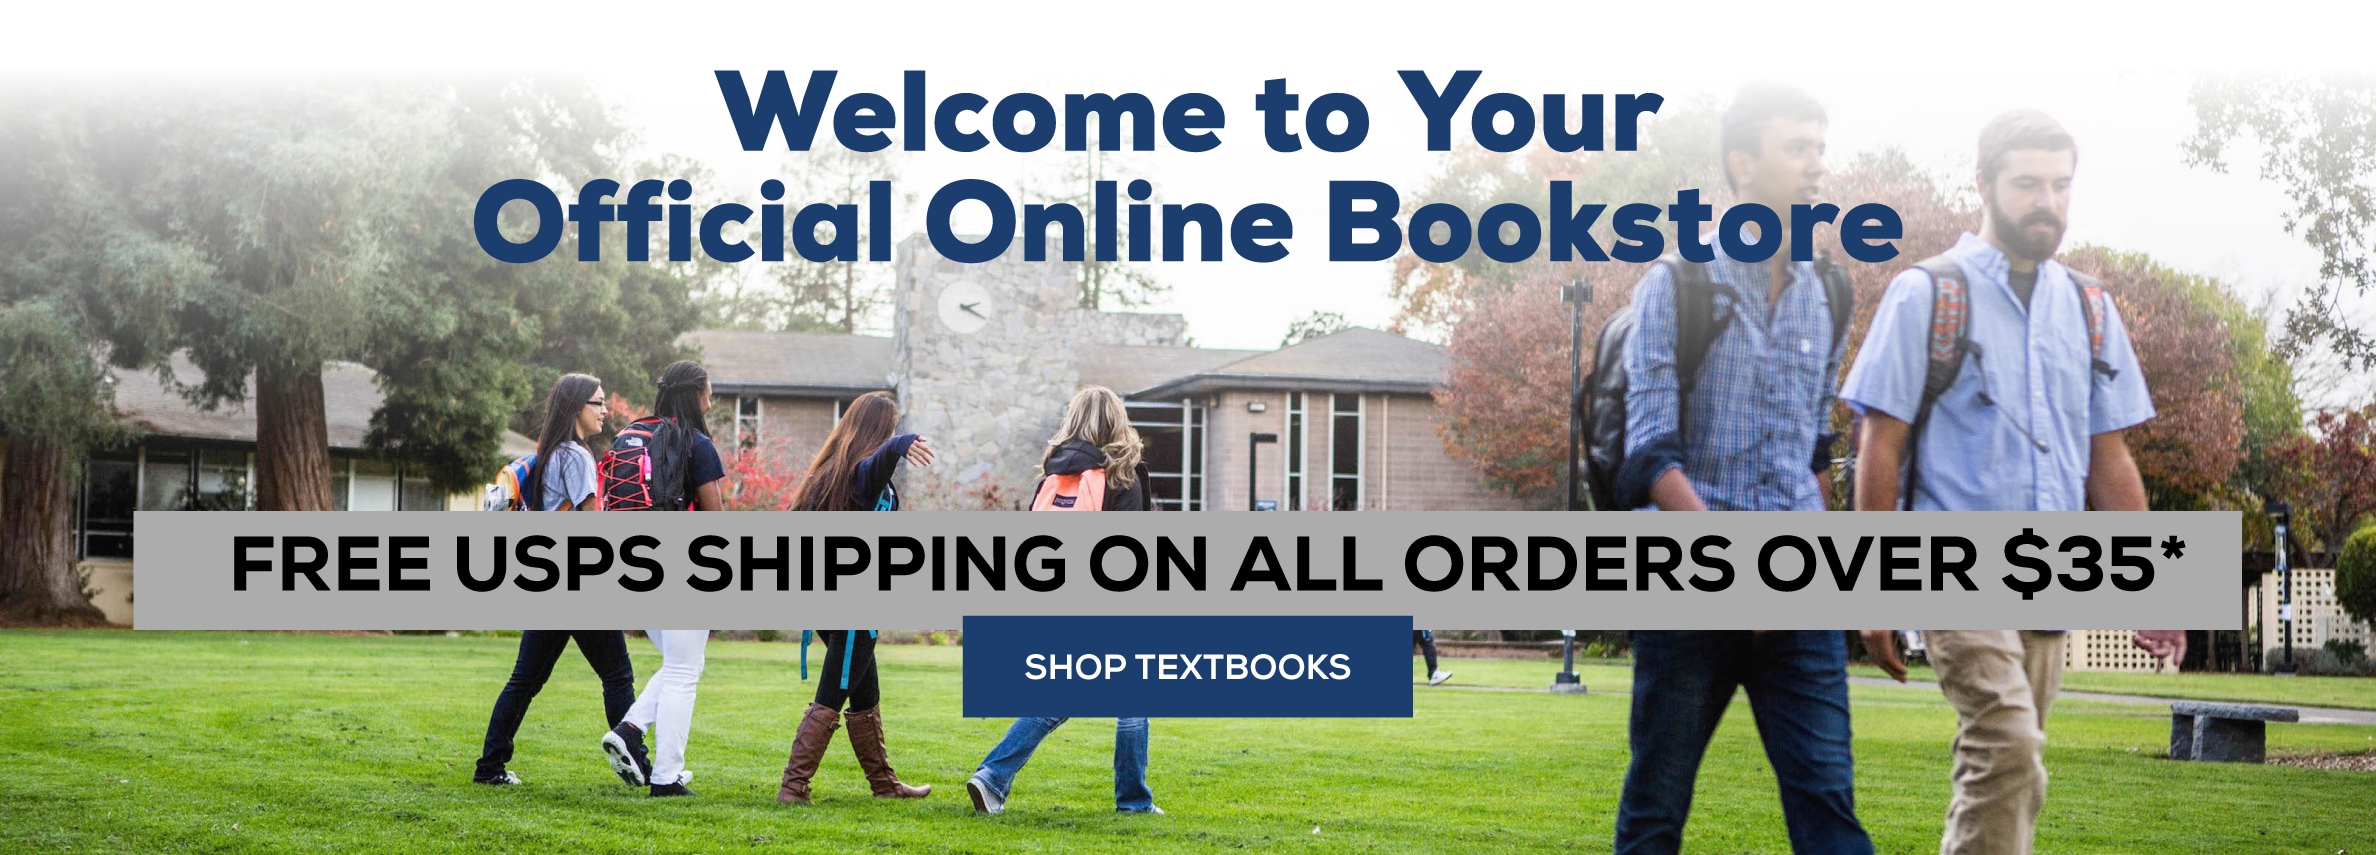 Welcome to your official online bookstore. Free USPS shipping on all orders over $35* *Excludes Marketplace orders. Shop Textbooks